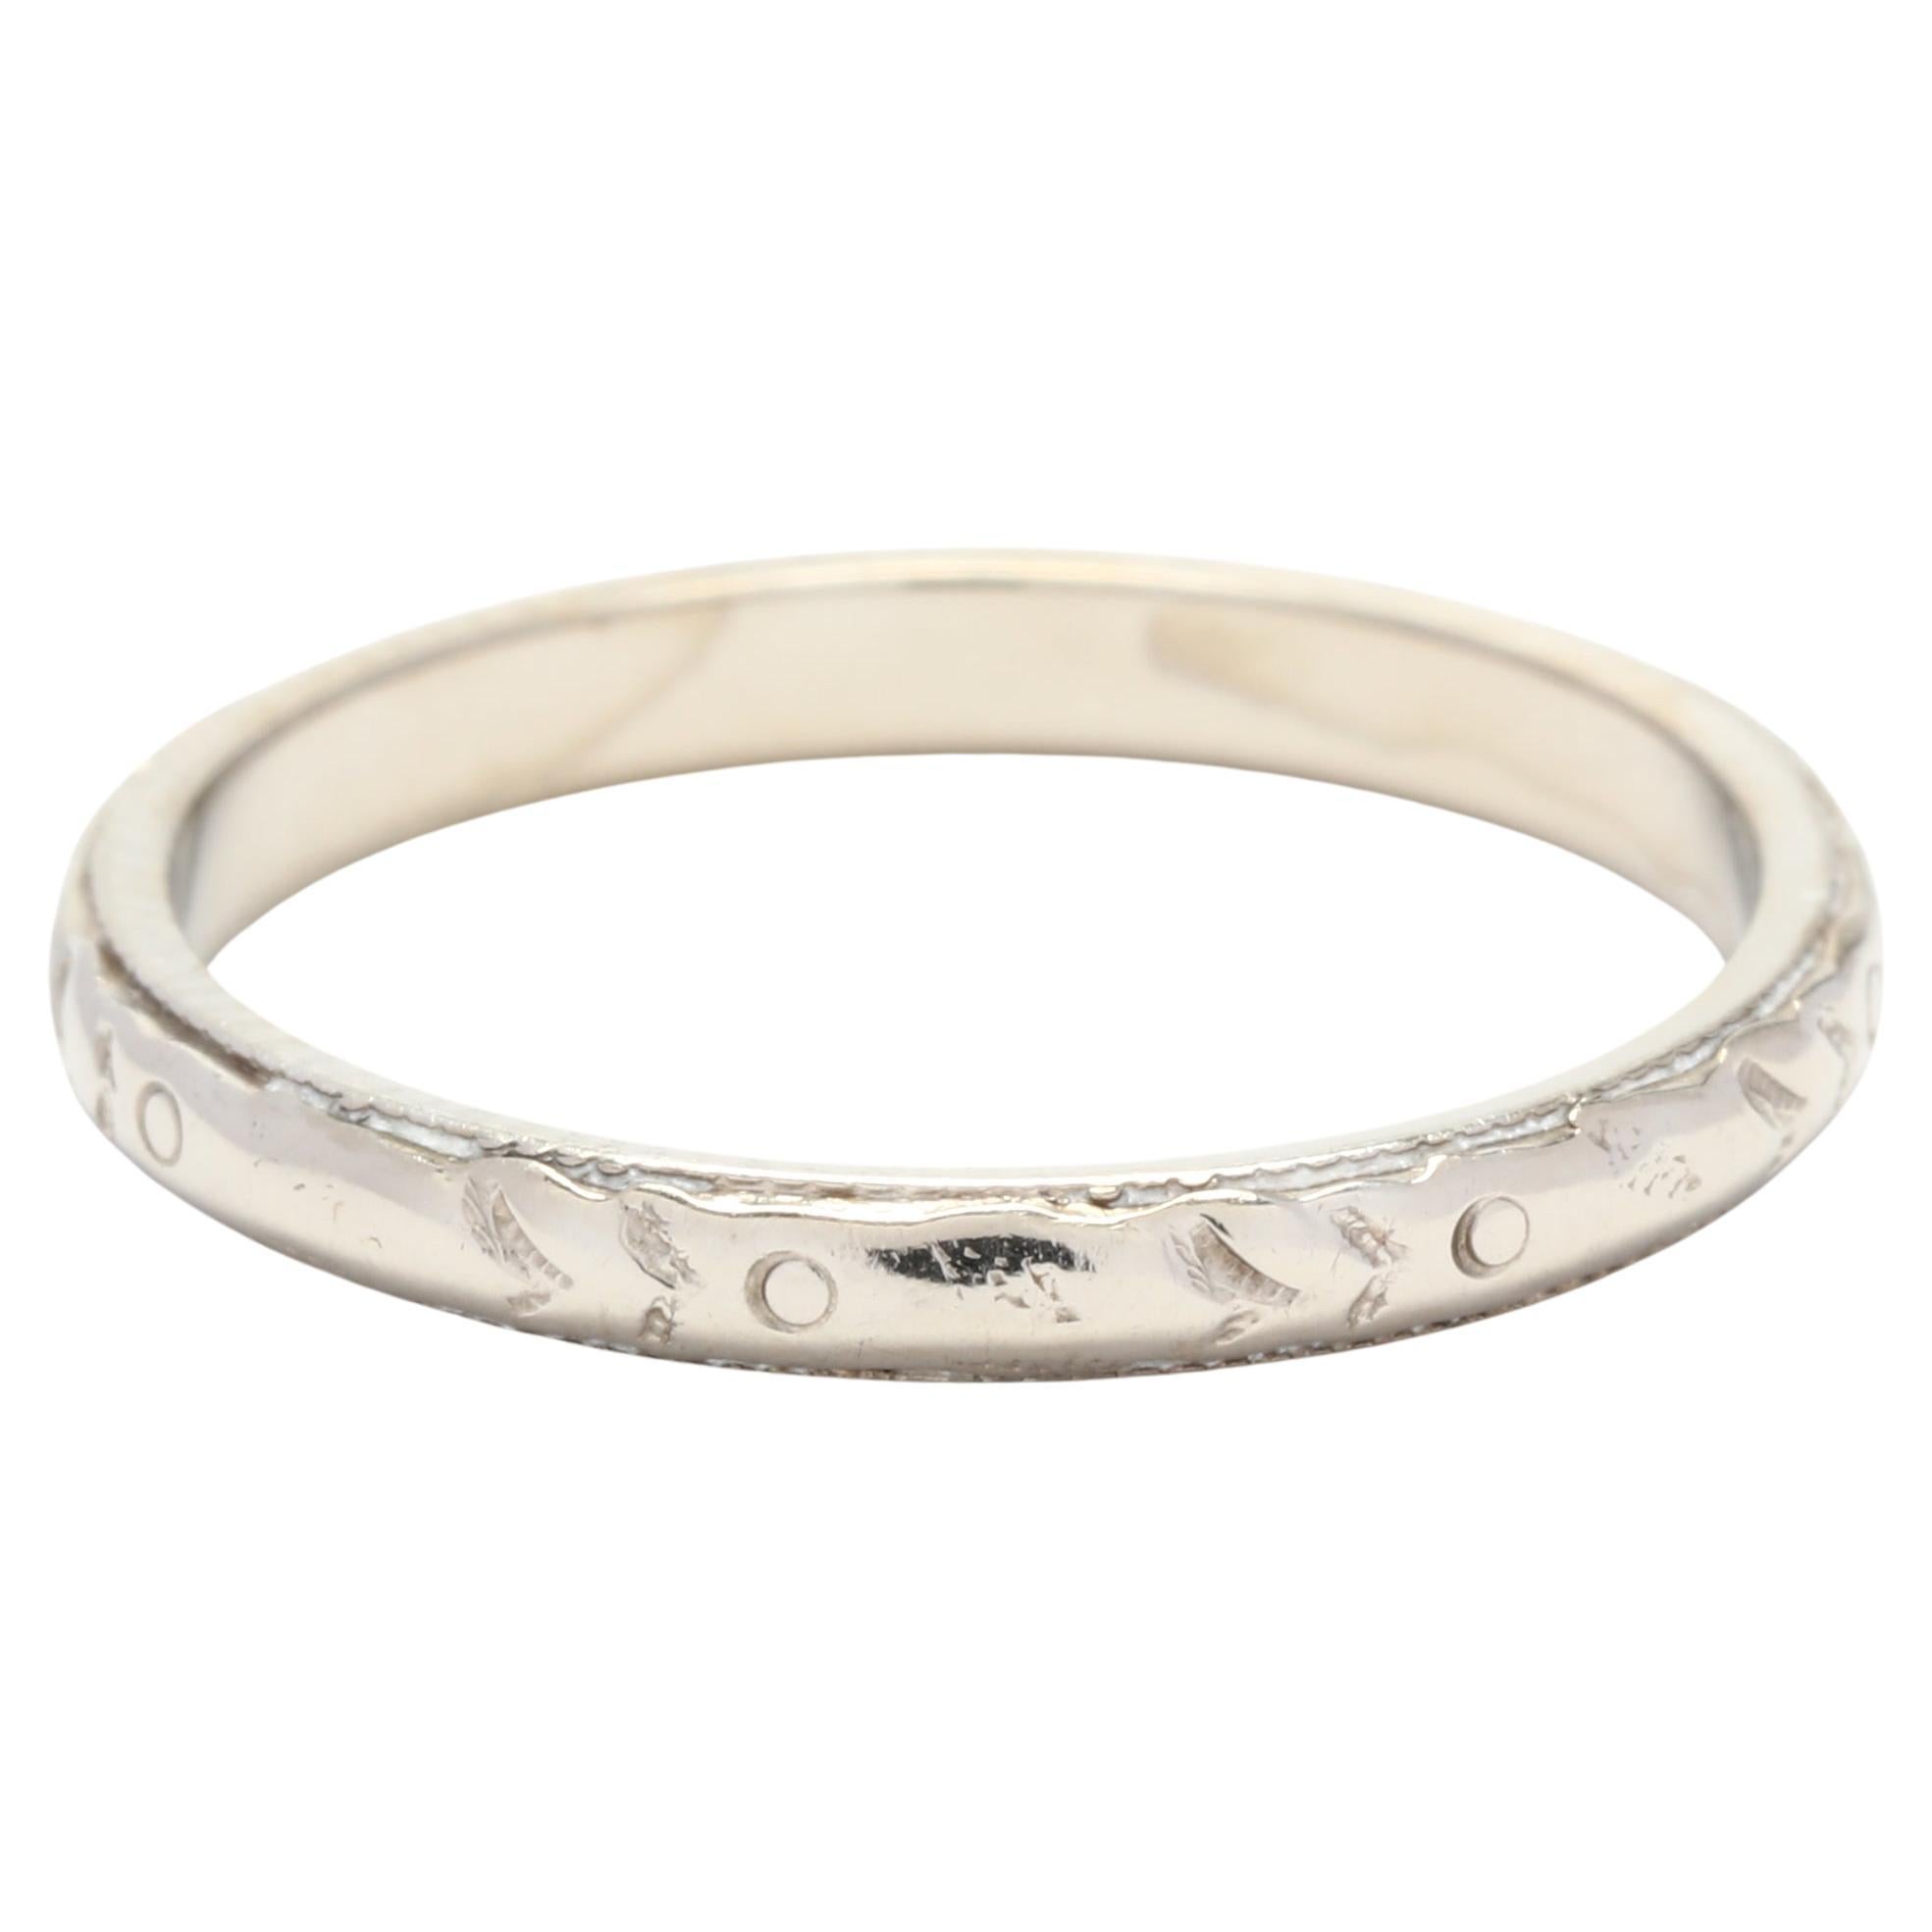 Art Deco Floral Engraved Wedding Band, 18K White Gold, Ring Size 5.25, Stackable